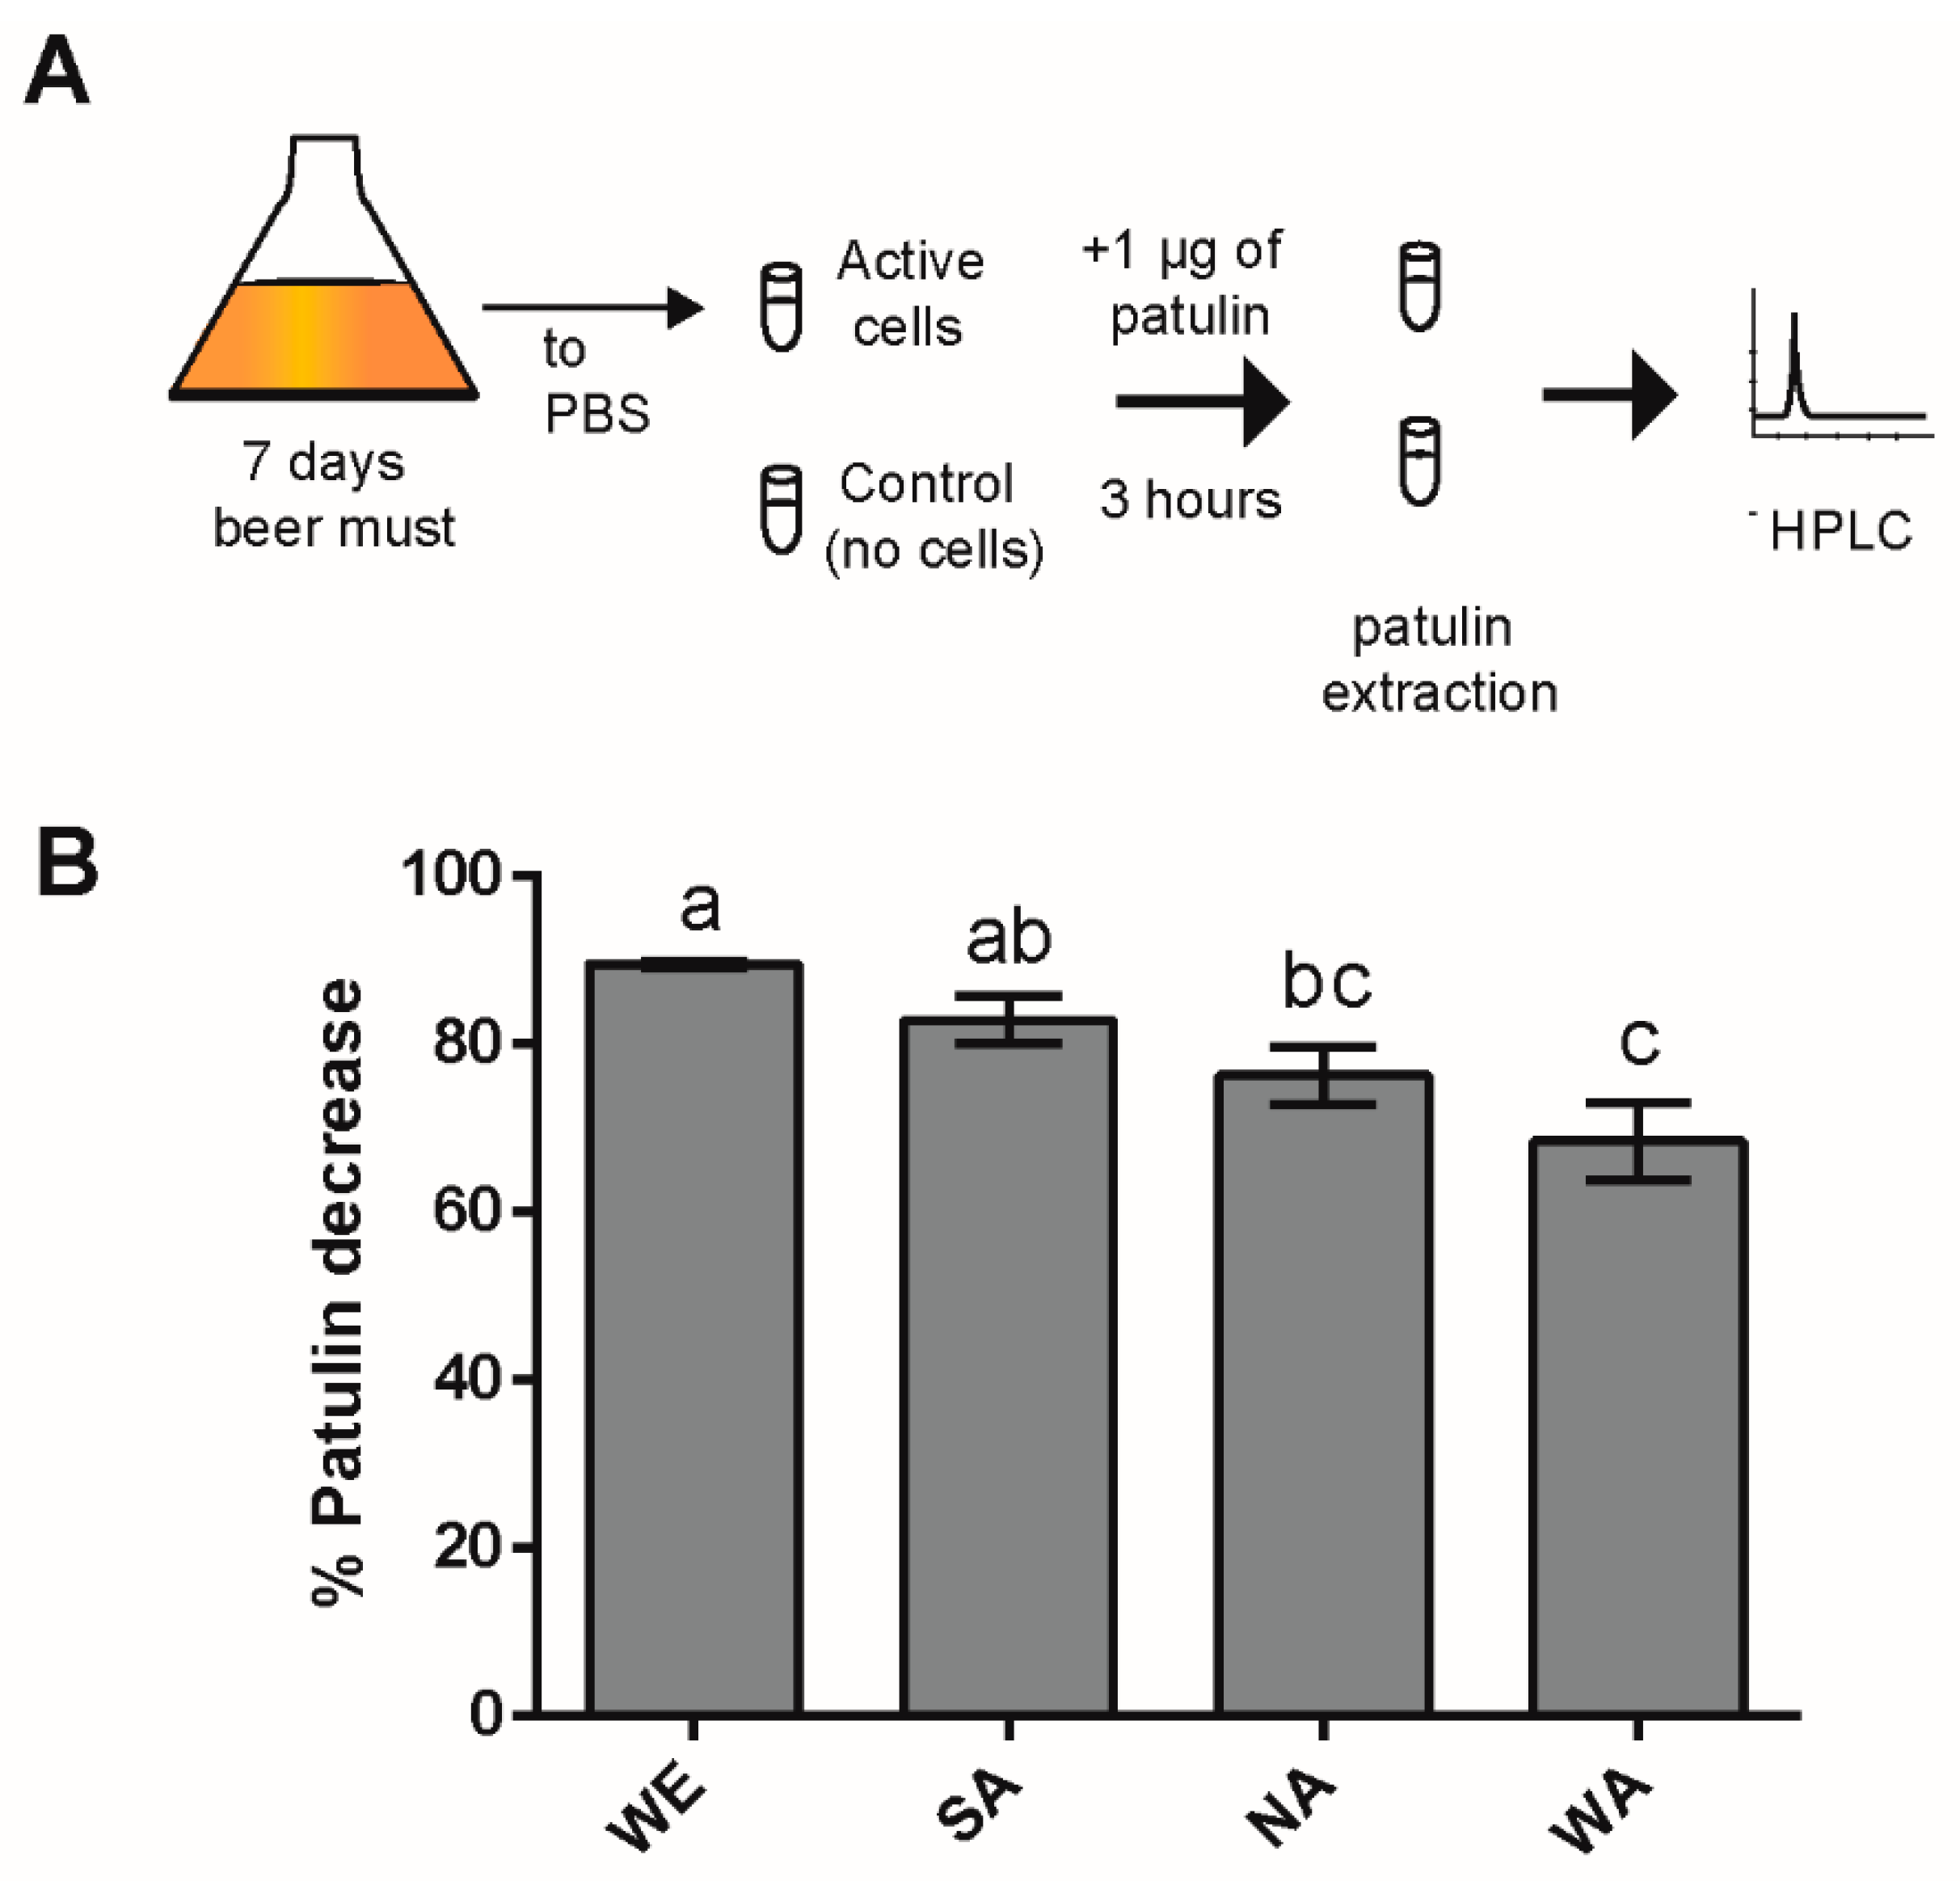 | Saccharomyces Biosorption Toxin in in Distinct Patulin to Changes Differences Transcriptional | Free cerevisiae Toxins Full-Text Underlie Response